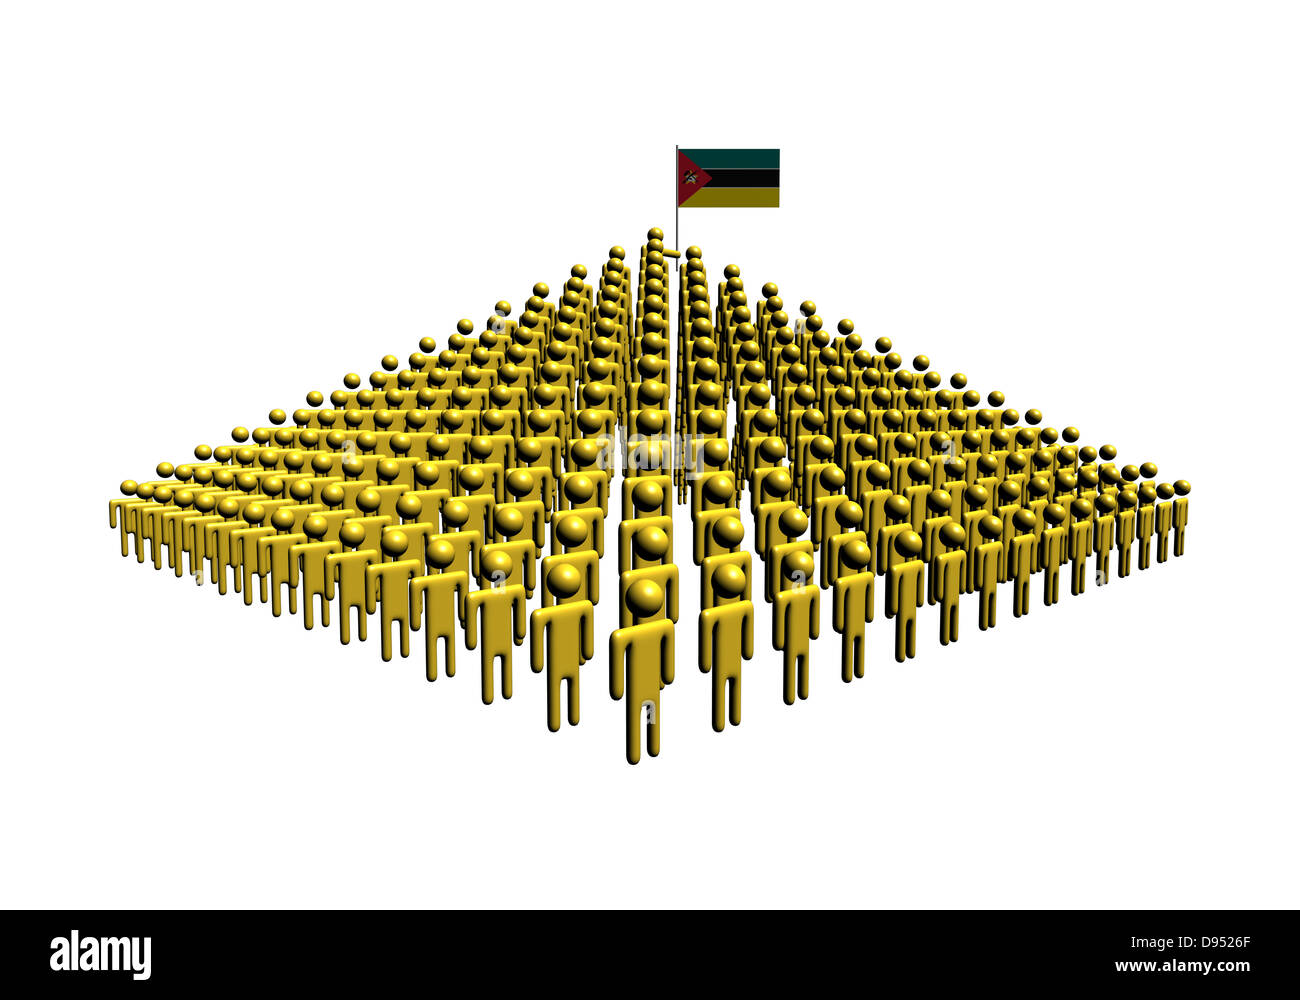 Pyramid of abstract people with Mozambique flag illustration Stock Photo